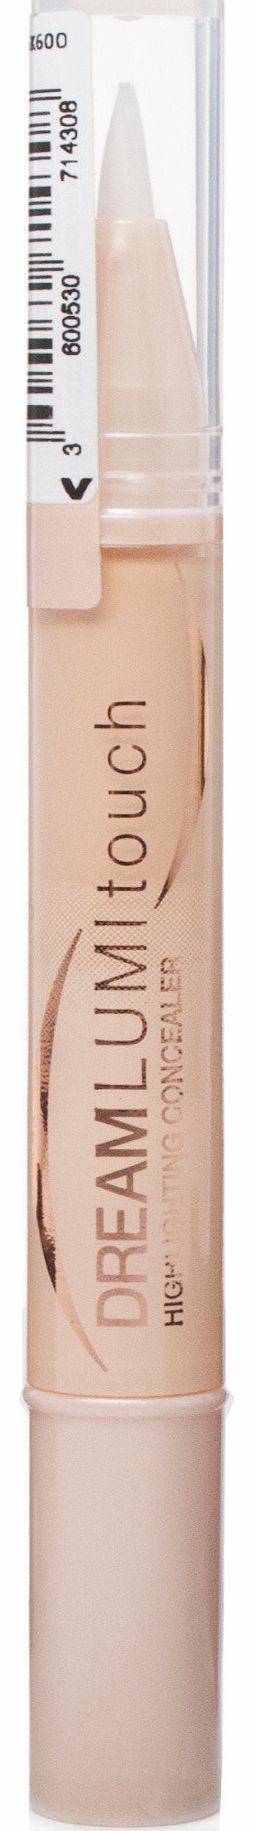 Maybelline Dream Lumi Touch Concealer Ivory